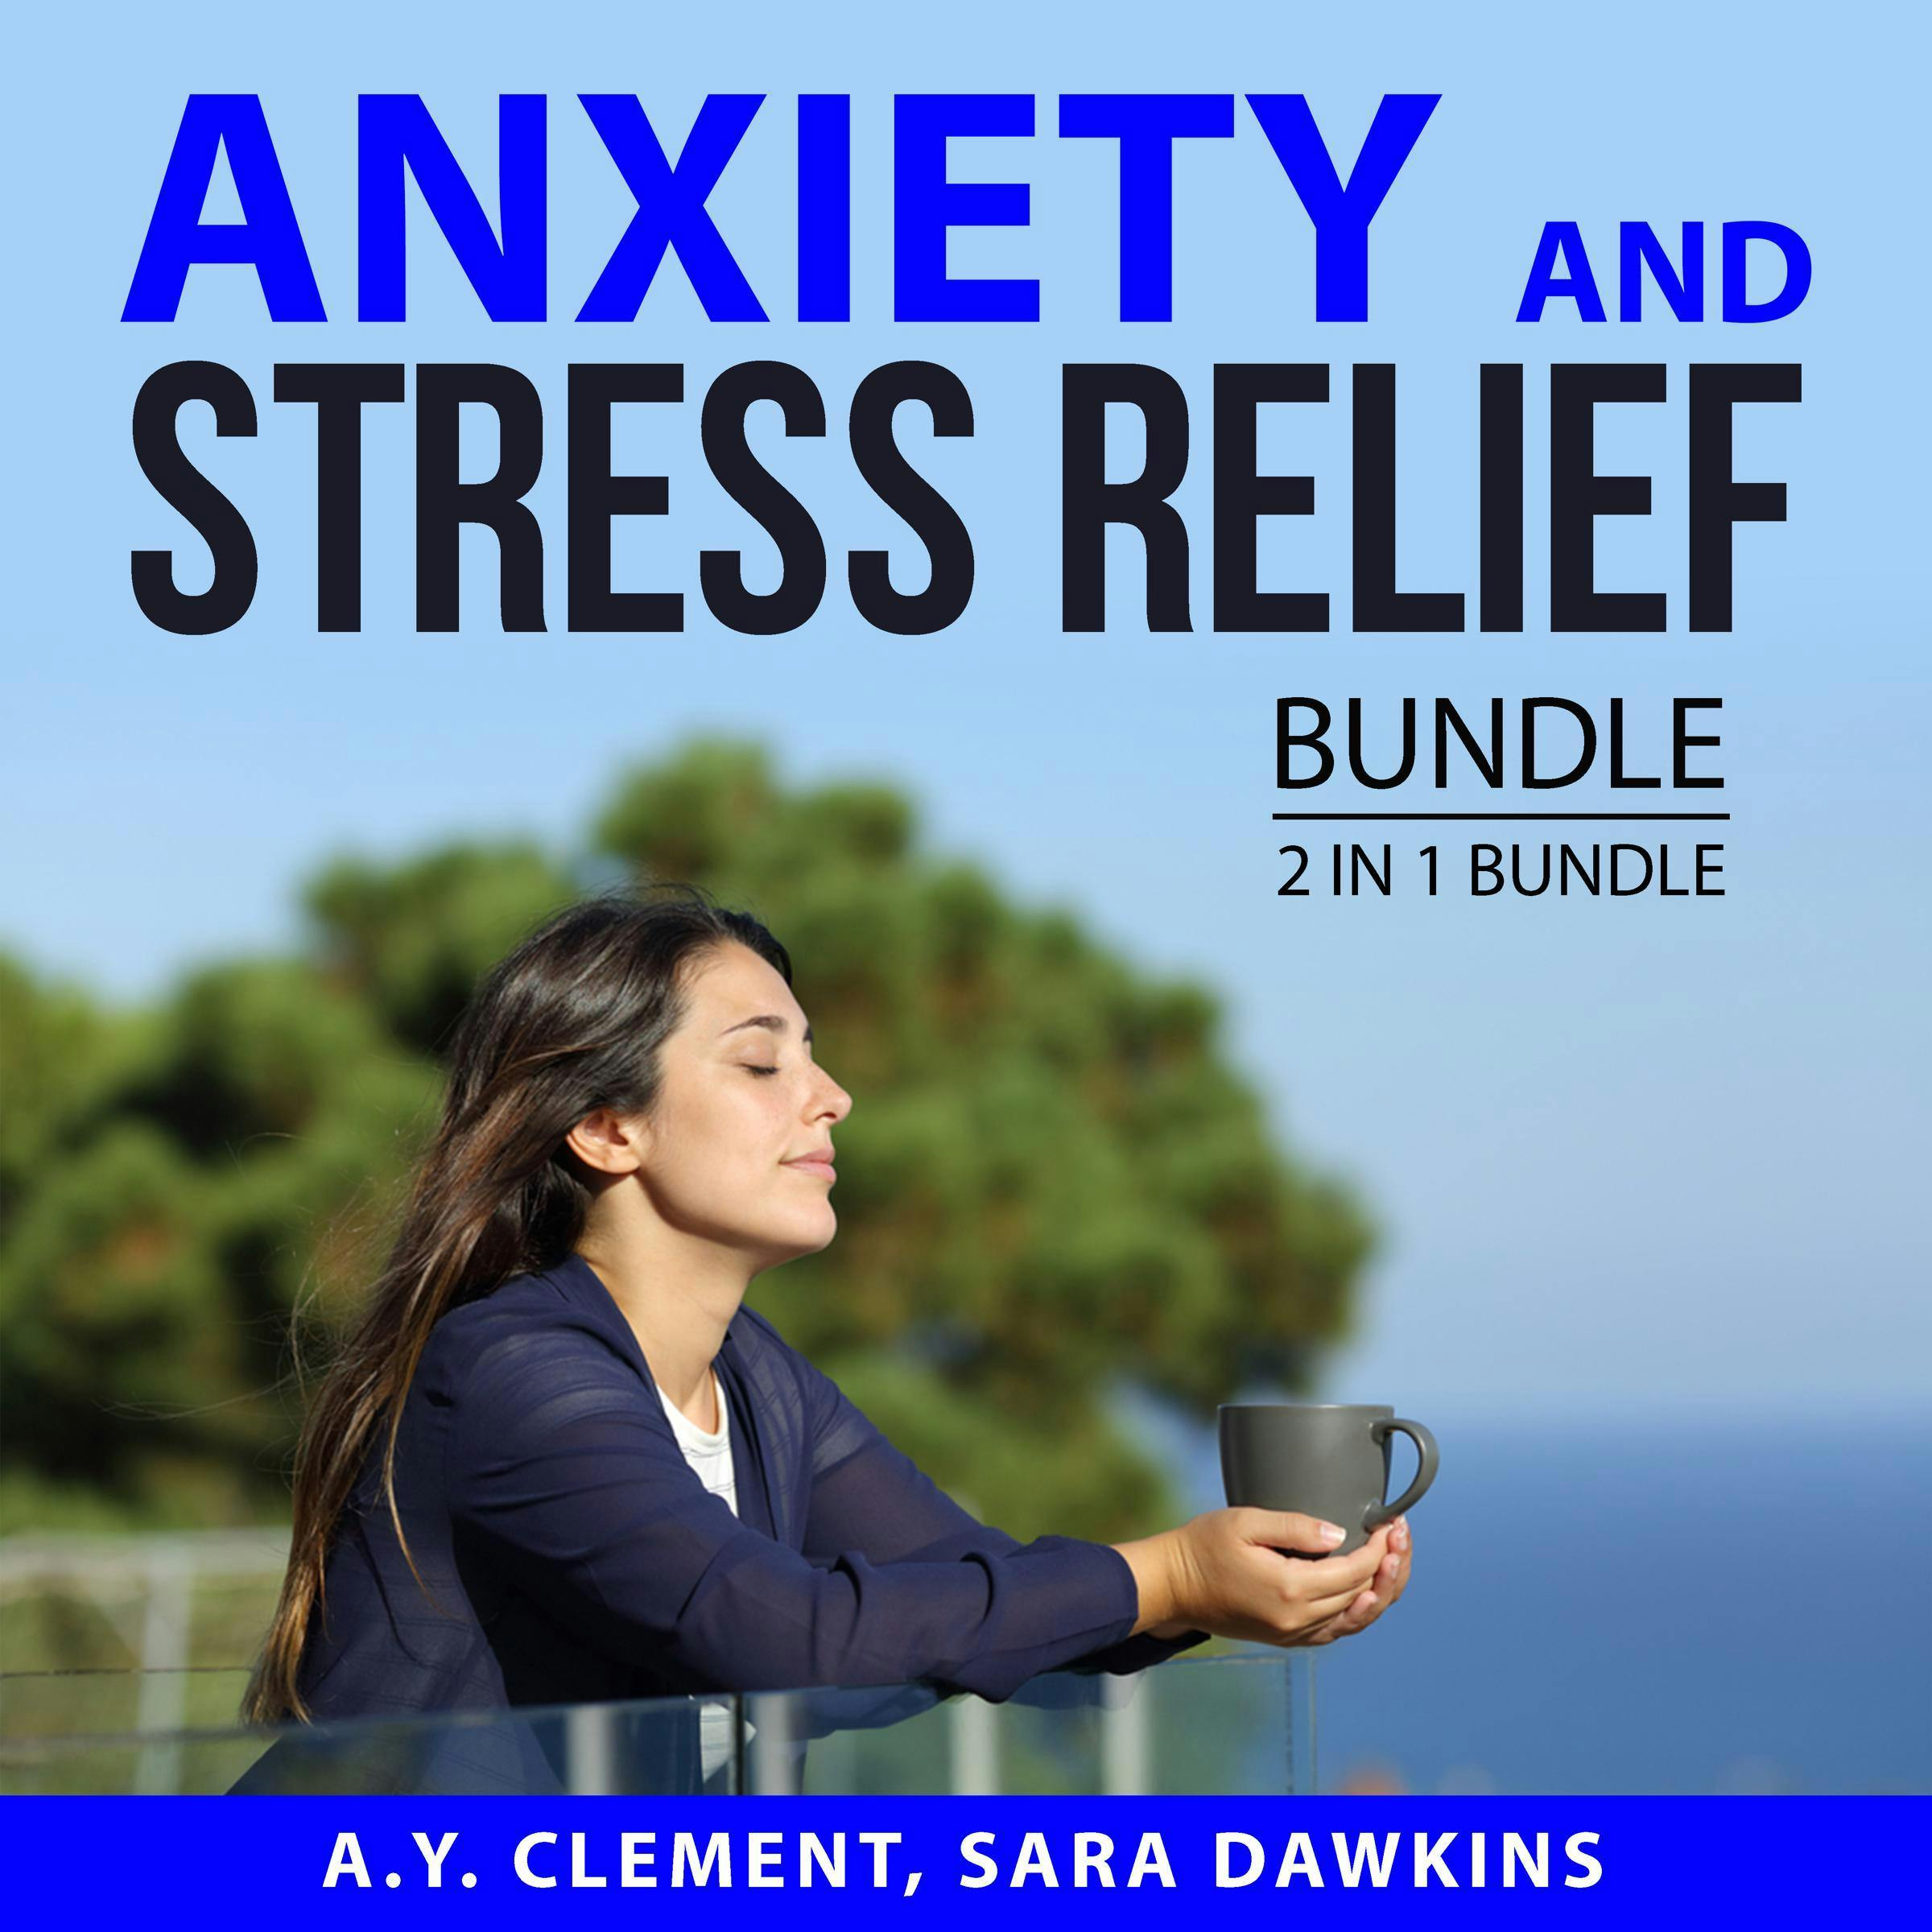 Anxiety and Stress Relief Bundle: 2 in 1 Bundle: The Acclaimed Guide to Stress and Hope and Help for Your Nerves - A.Y. Clement, Sara Dawkins